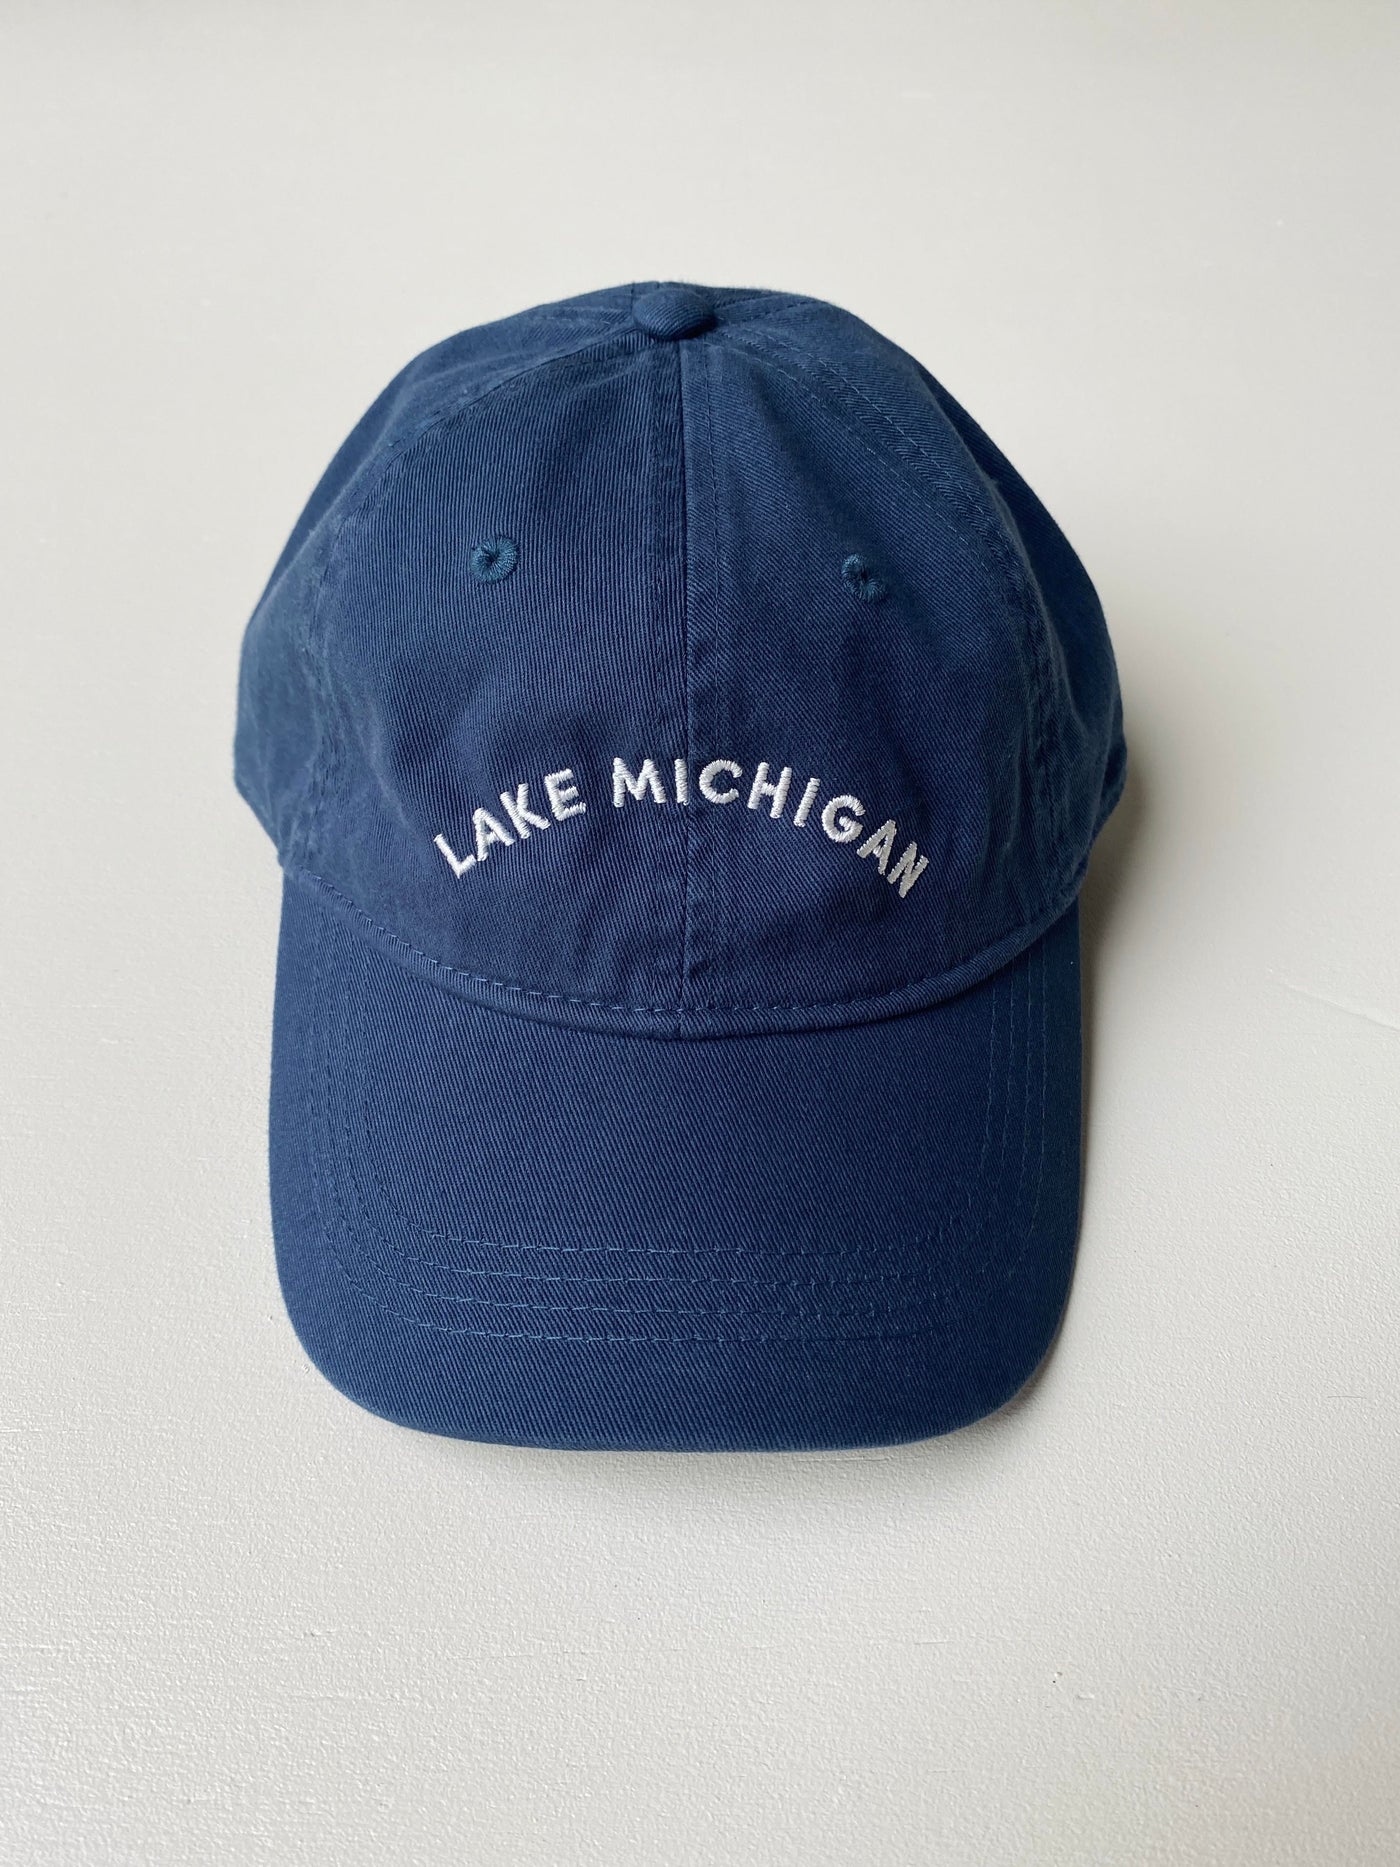 Navy baseball hat with white embroidered Lake Michigan stitched on it.